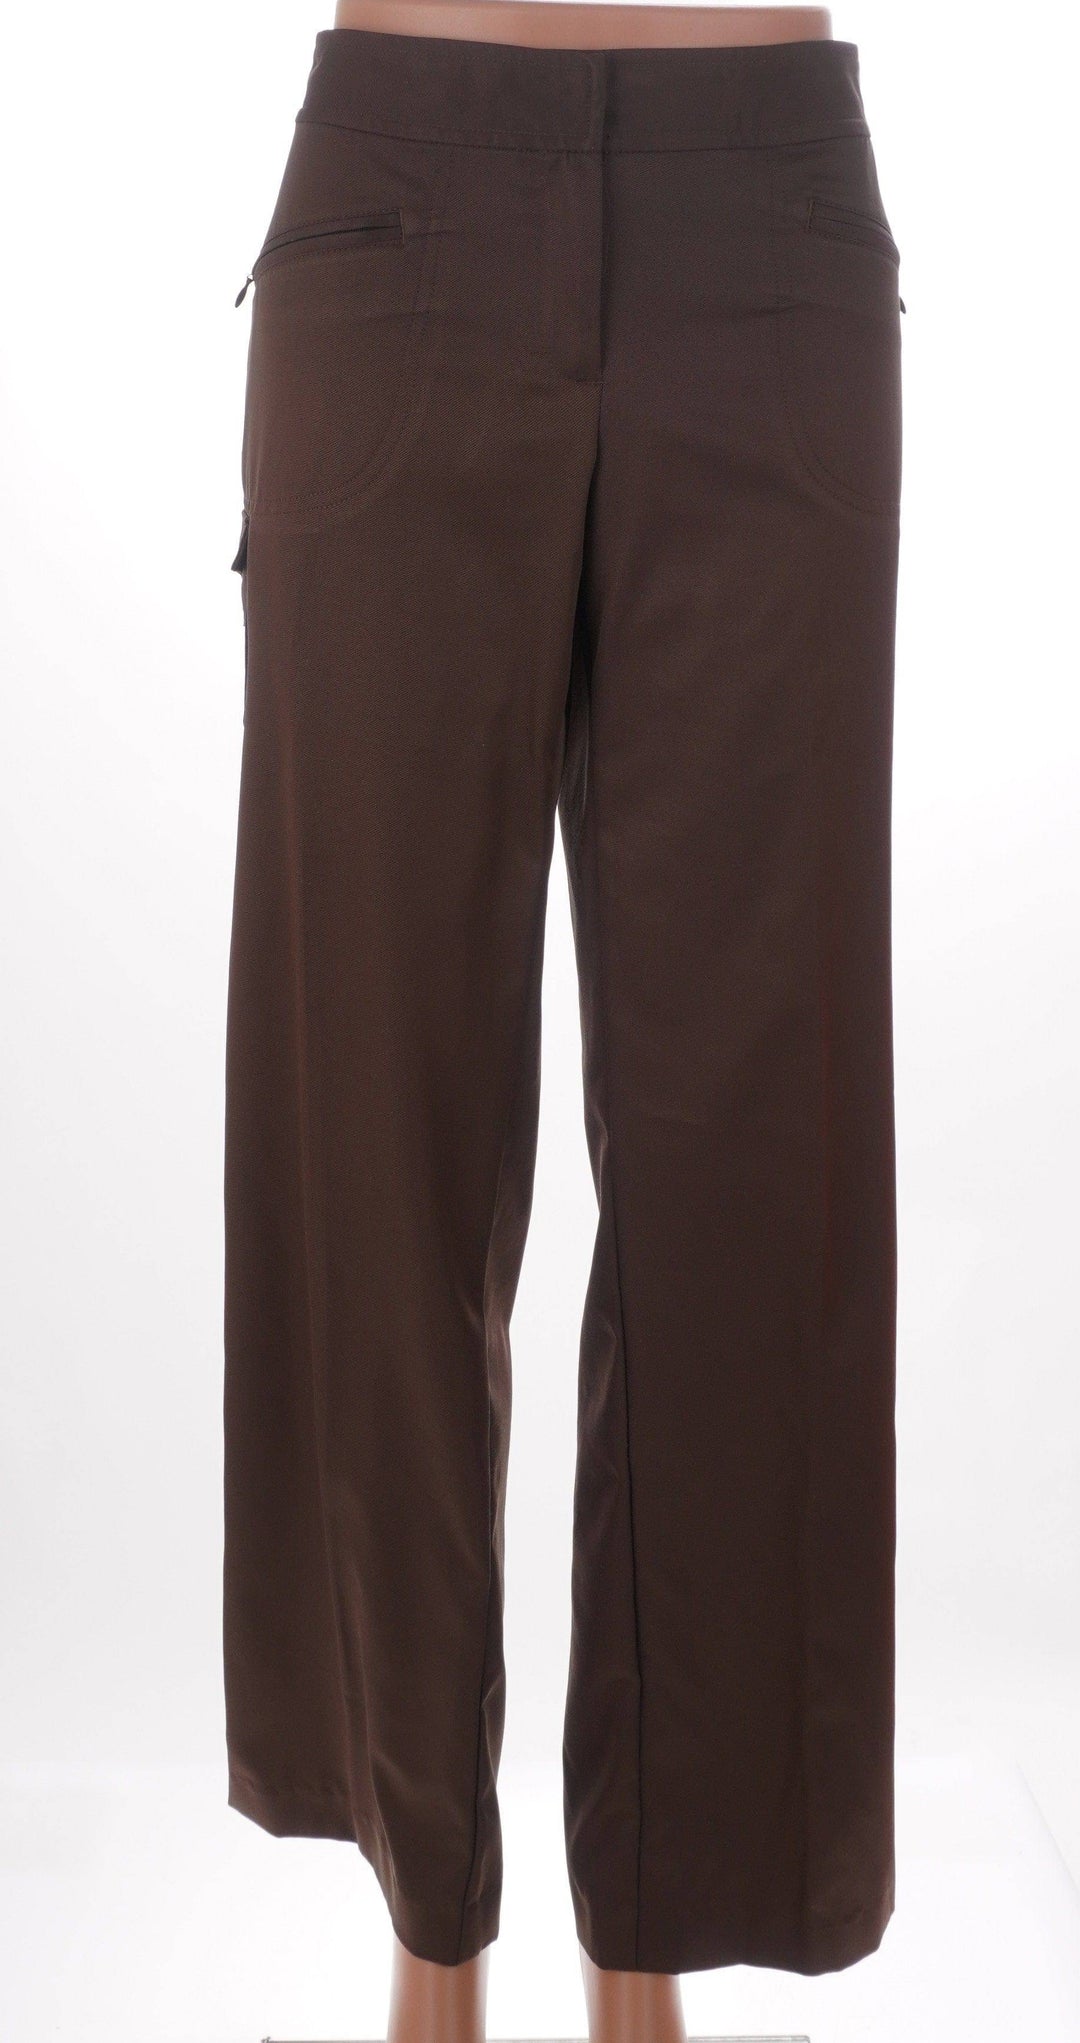 Izod XFG Brown / 6 / Consigned Izod XFG Pant - Brown - Size 6